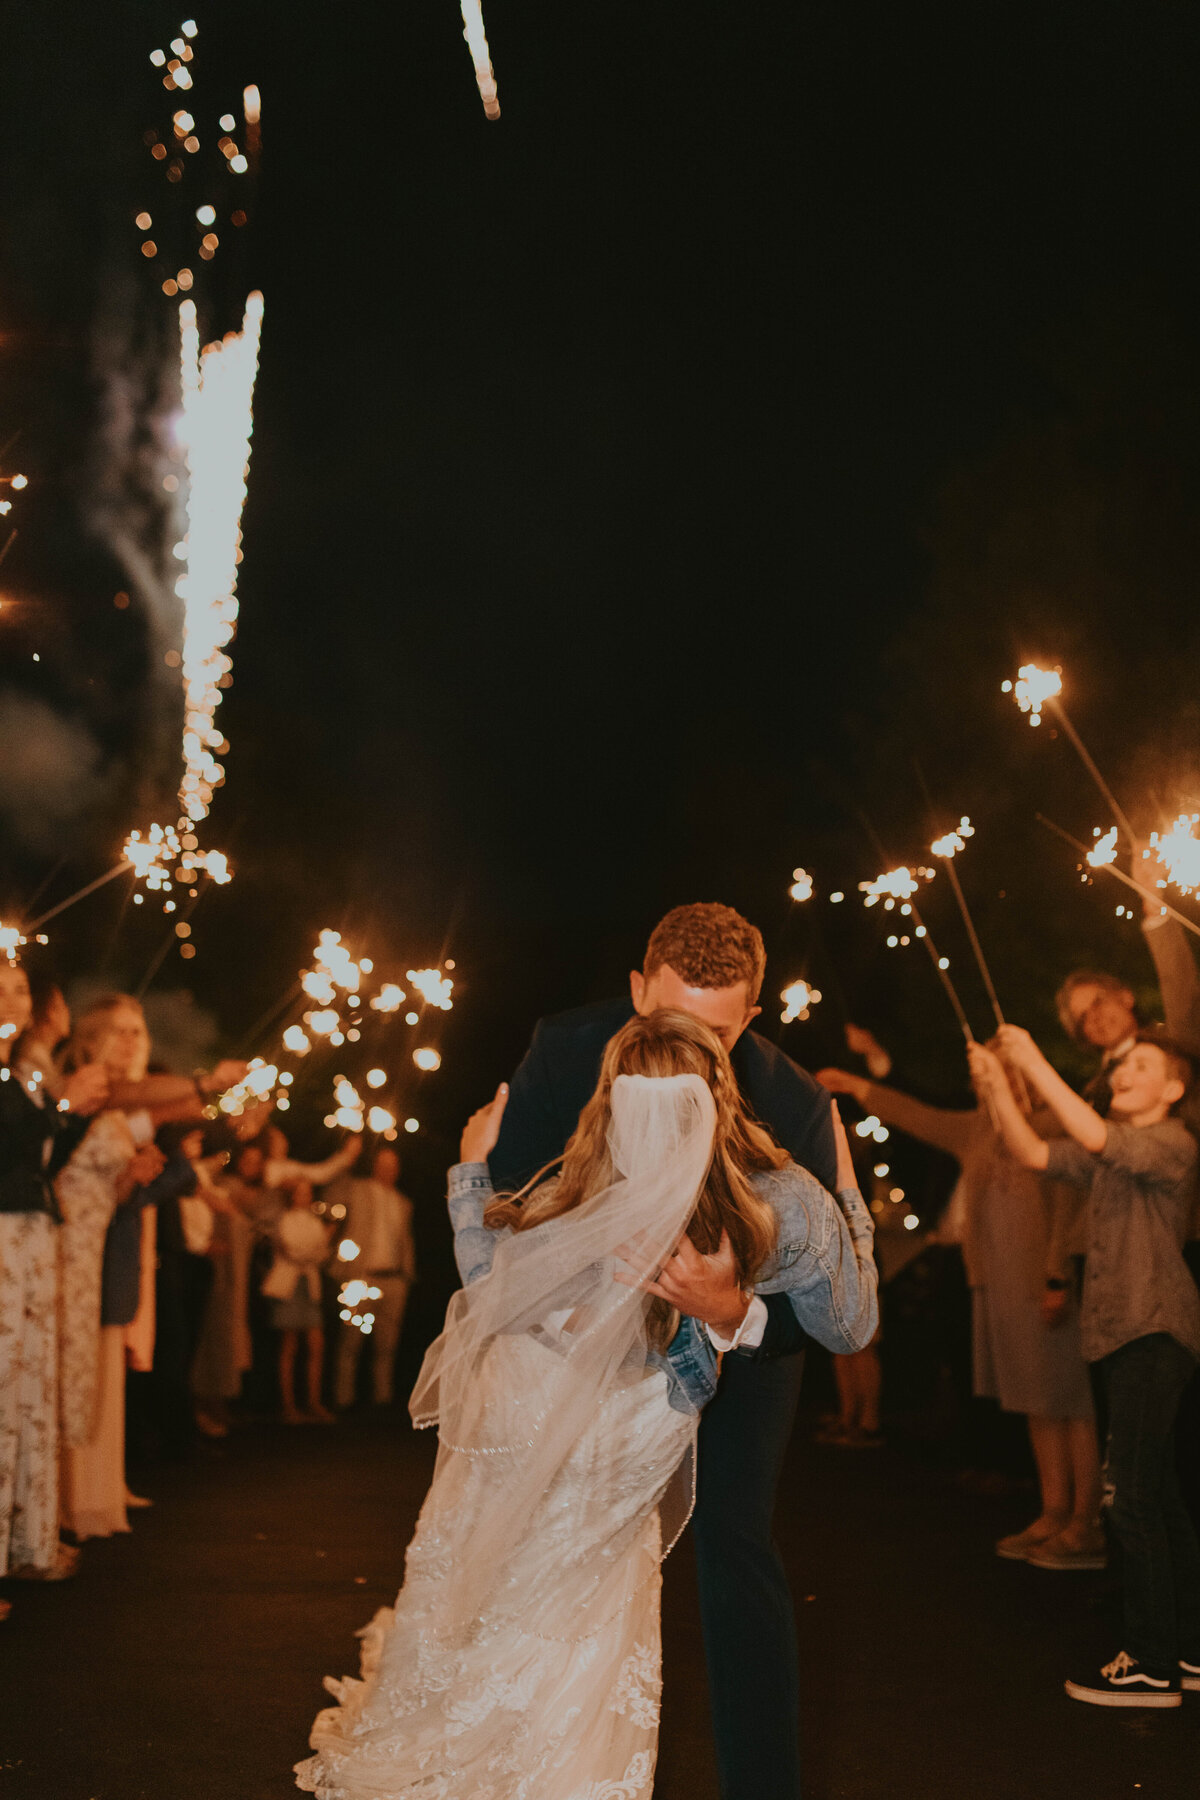 Couple kissing surrounded by family holding sparklers. It's nice time.